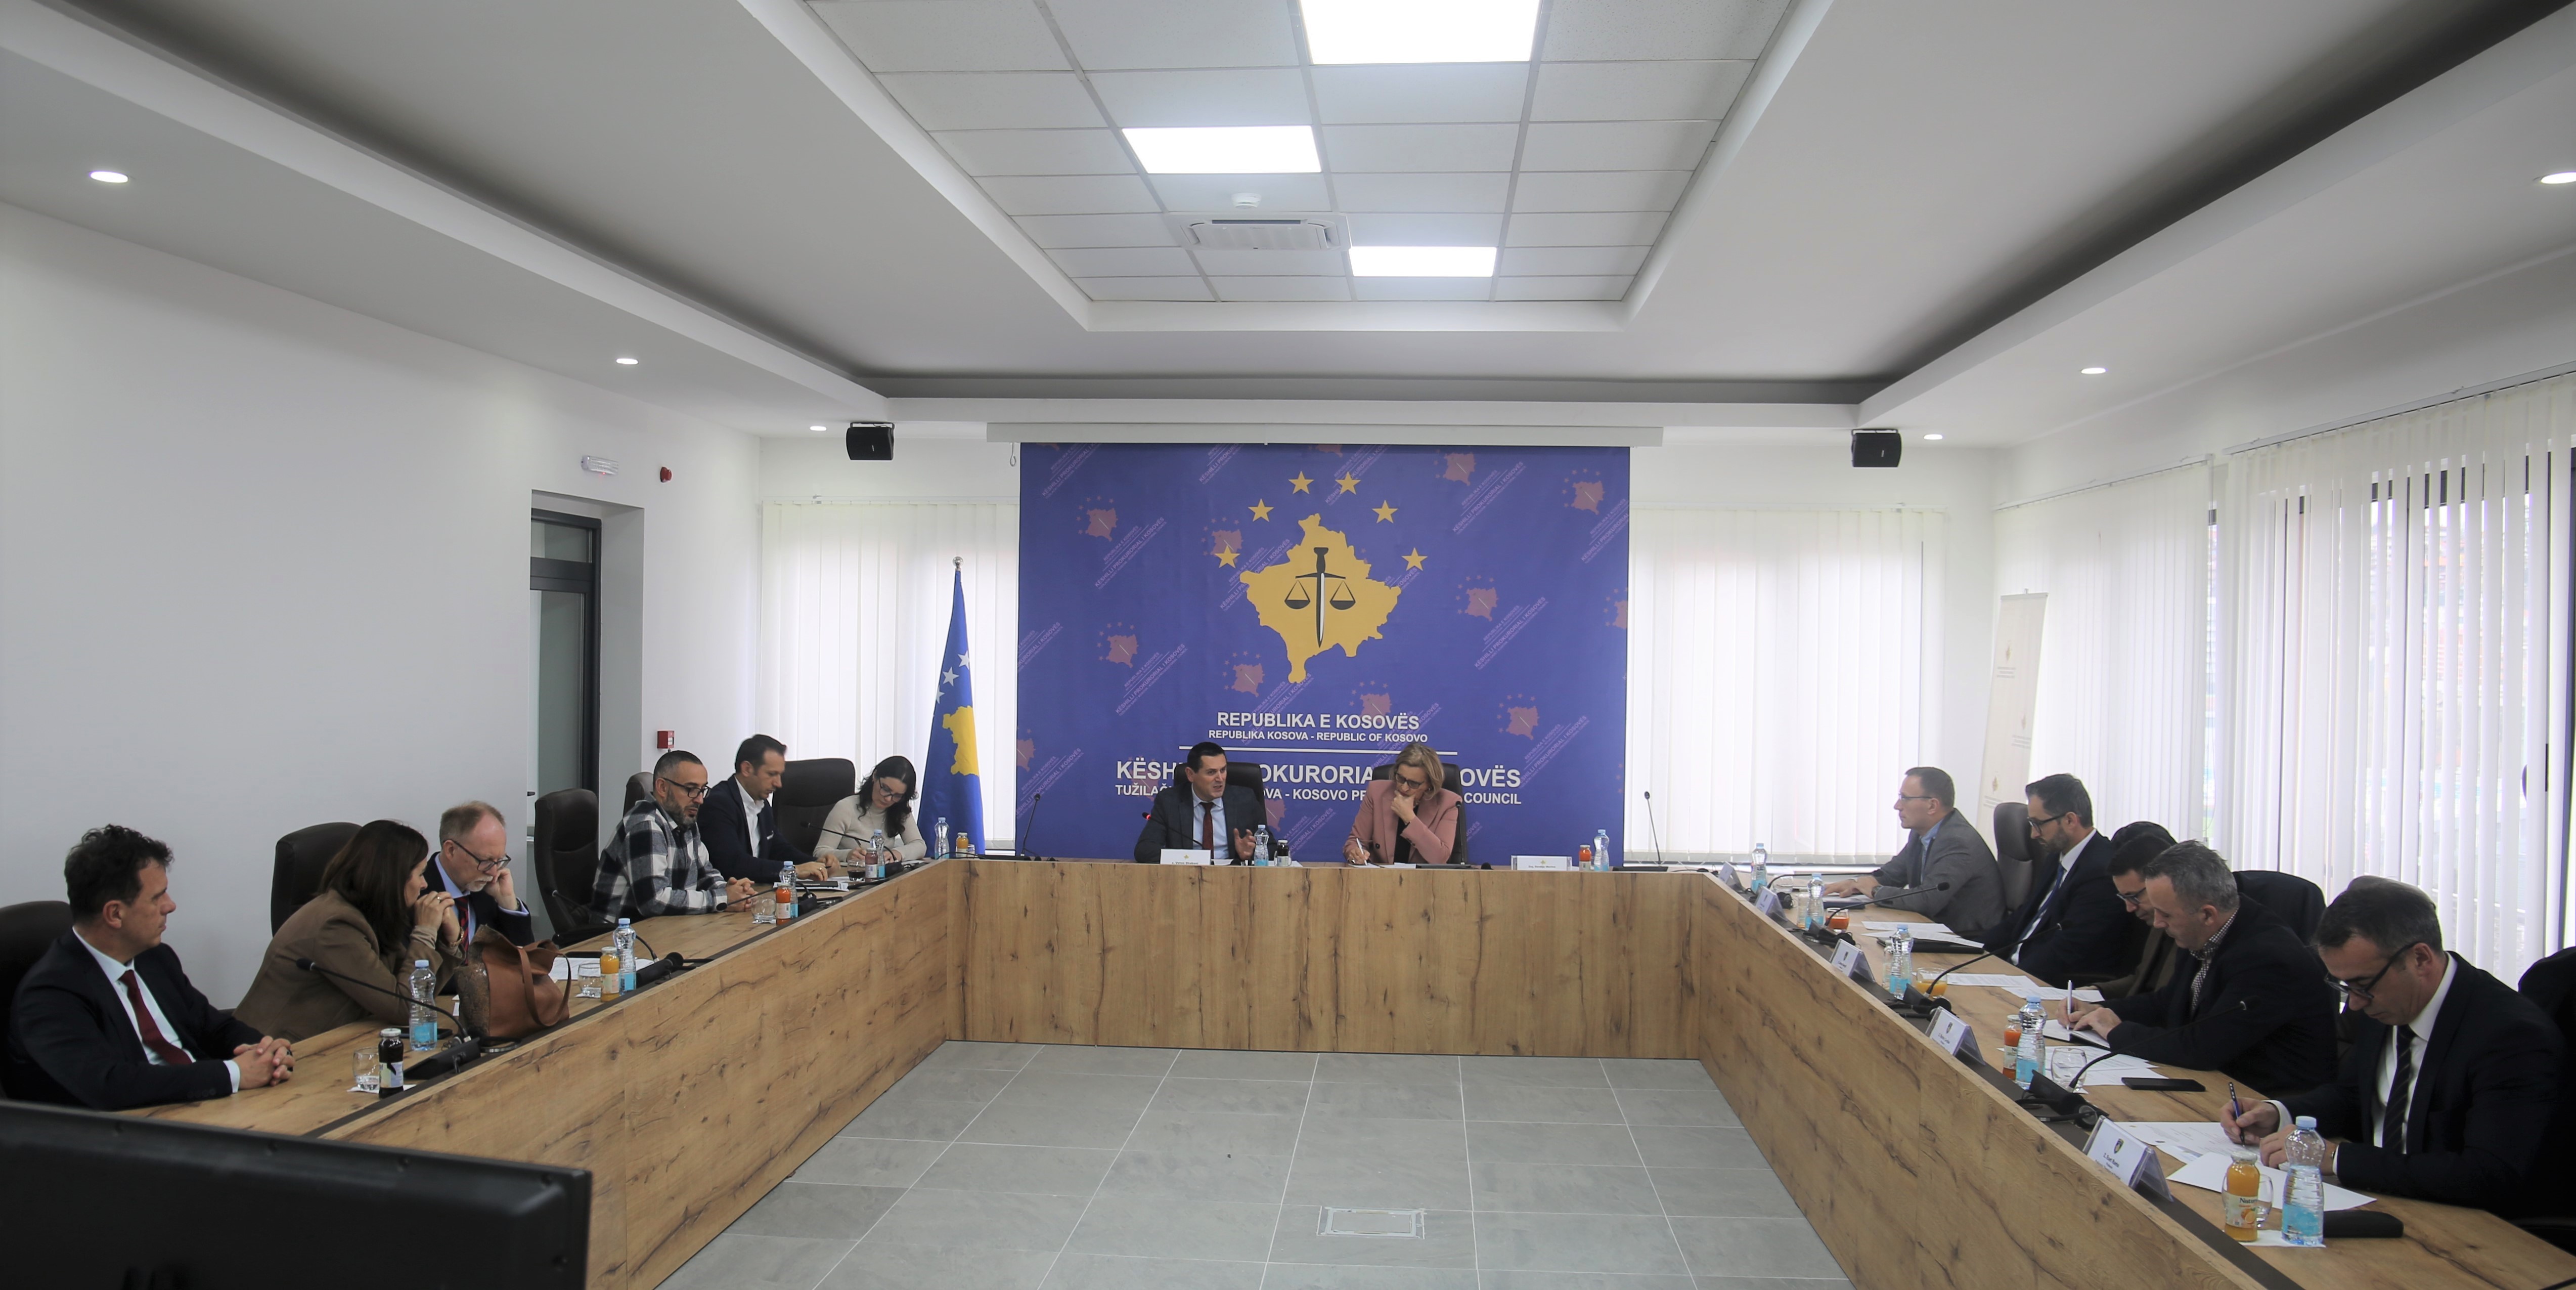 The meeting of the Commission for Administration of Prosecutions is held